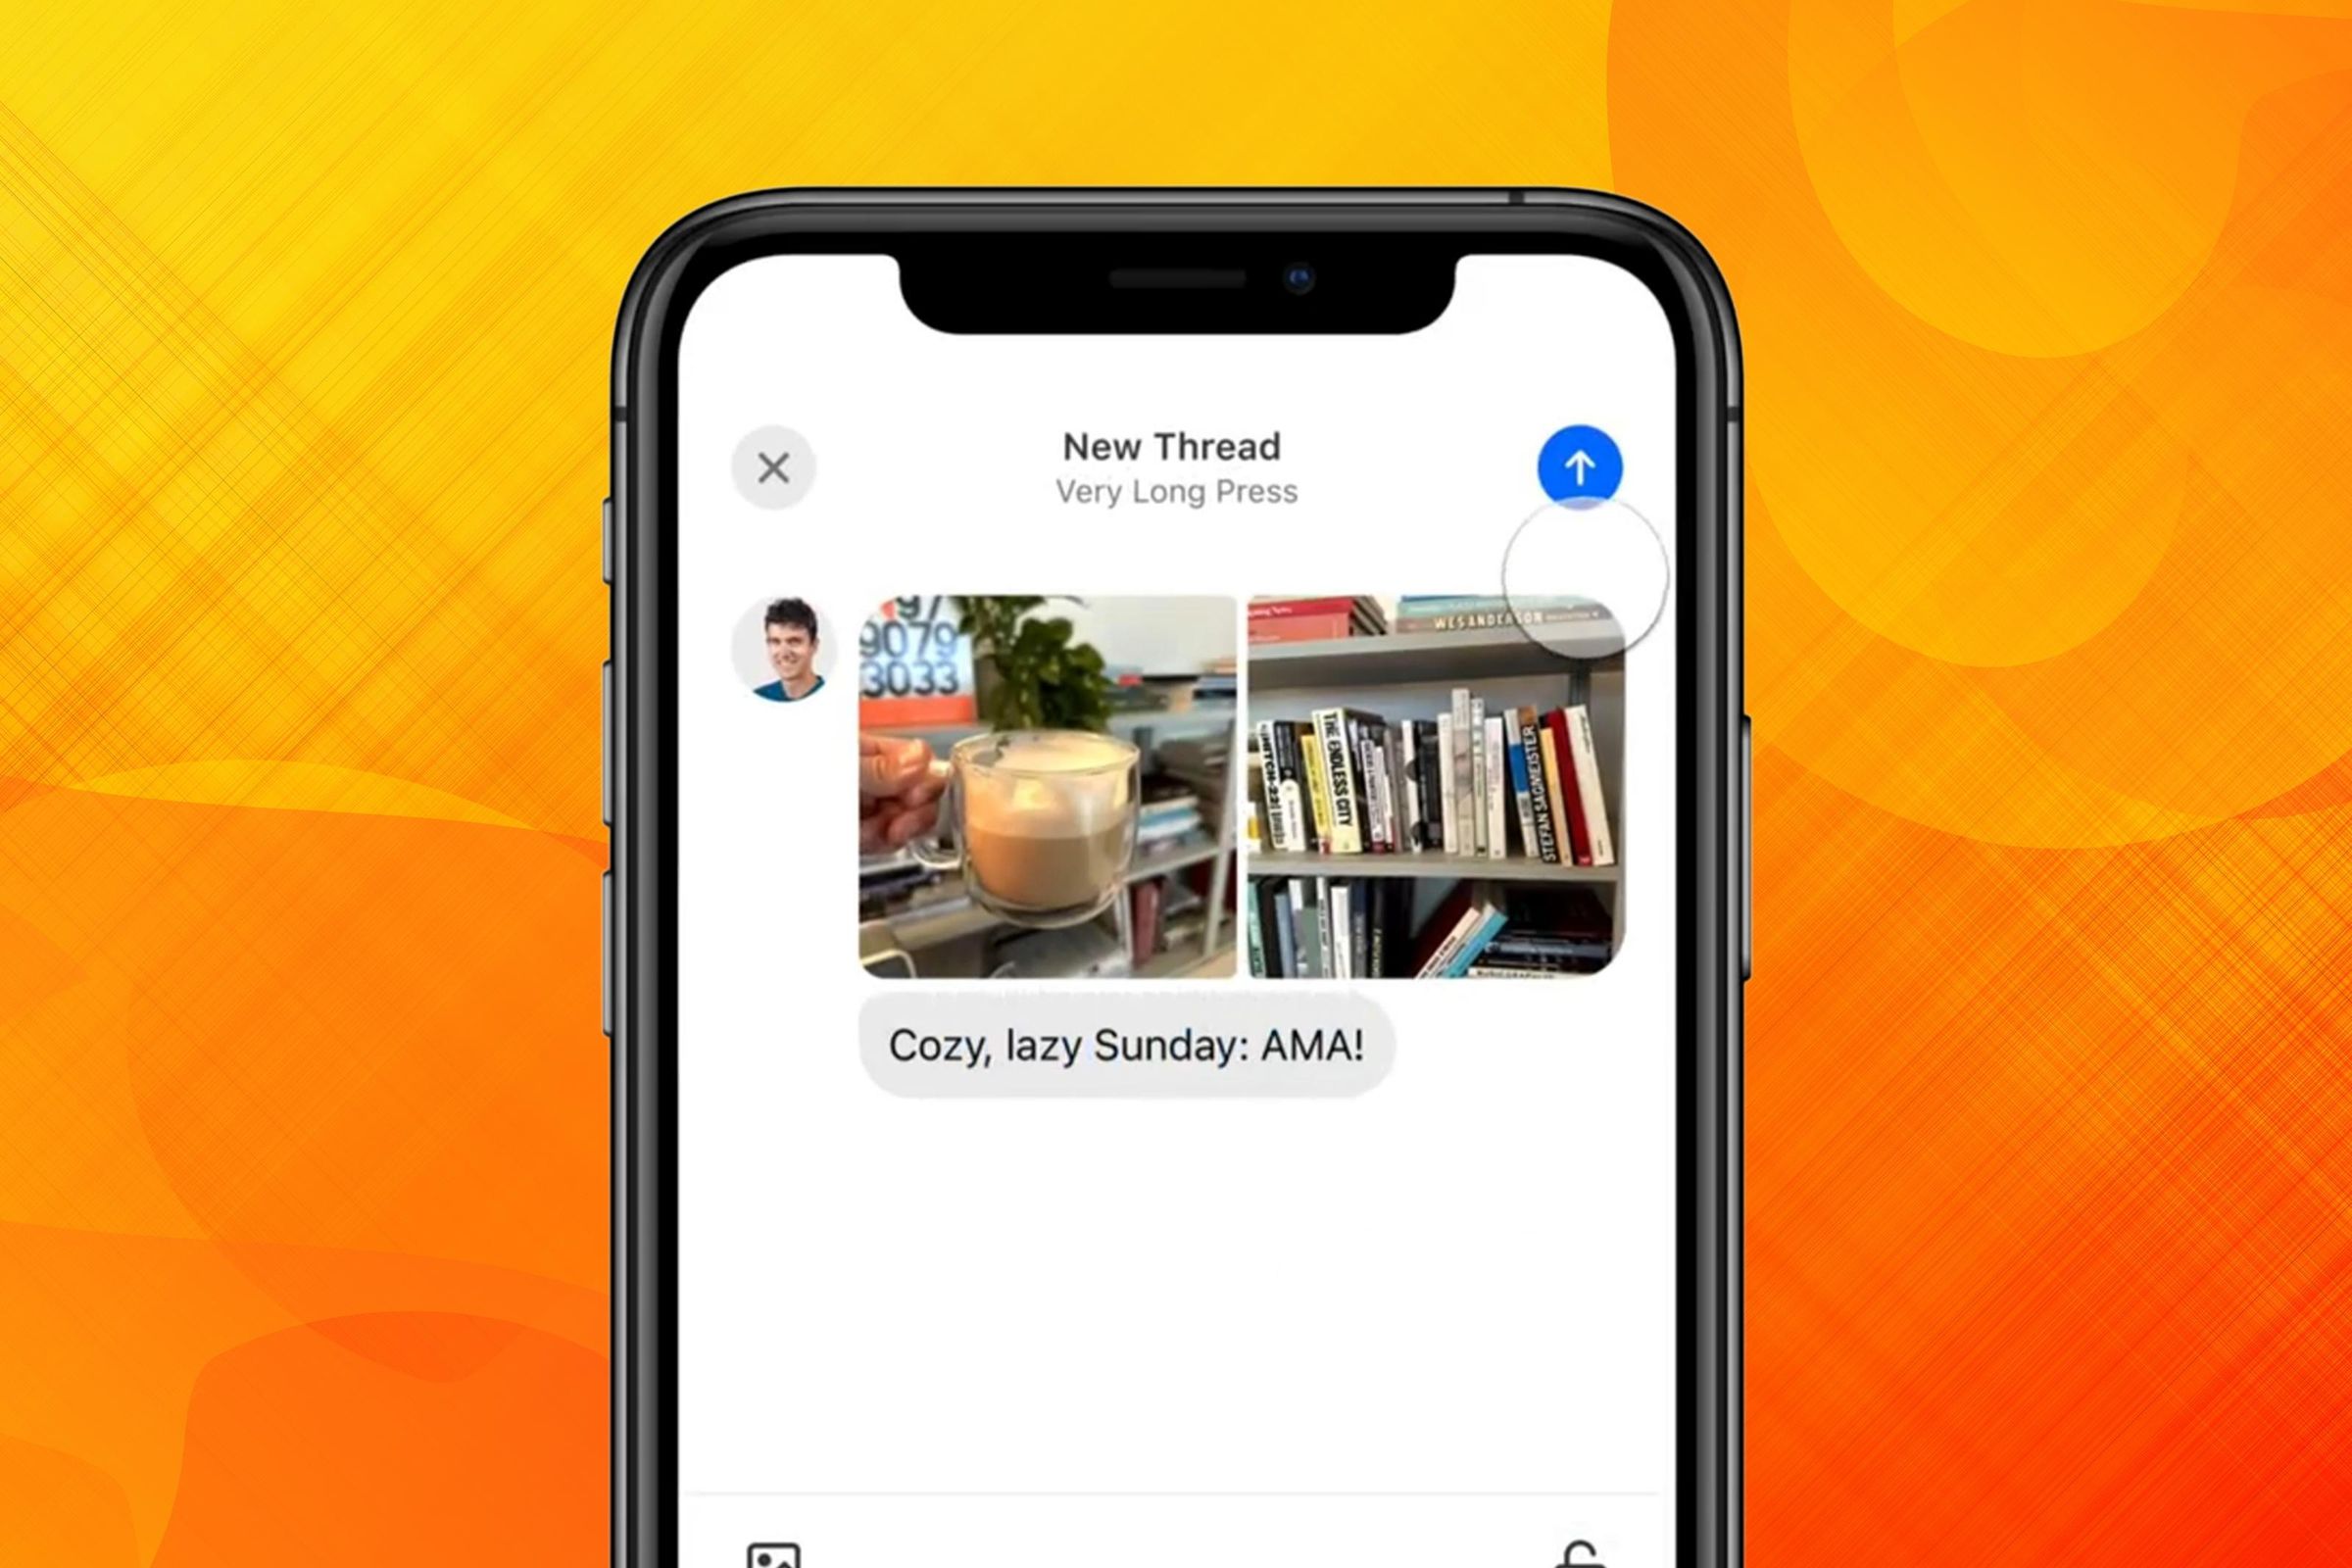 A mobile phone demonstrating Substack’s new Chat feature. The screen displays a new thread with pictures of coffe and a message that read “Cozy, lazy Sunday: AMA!” (Ask me anything).